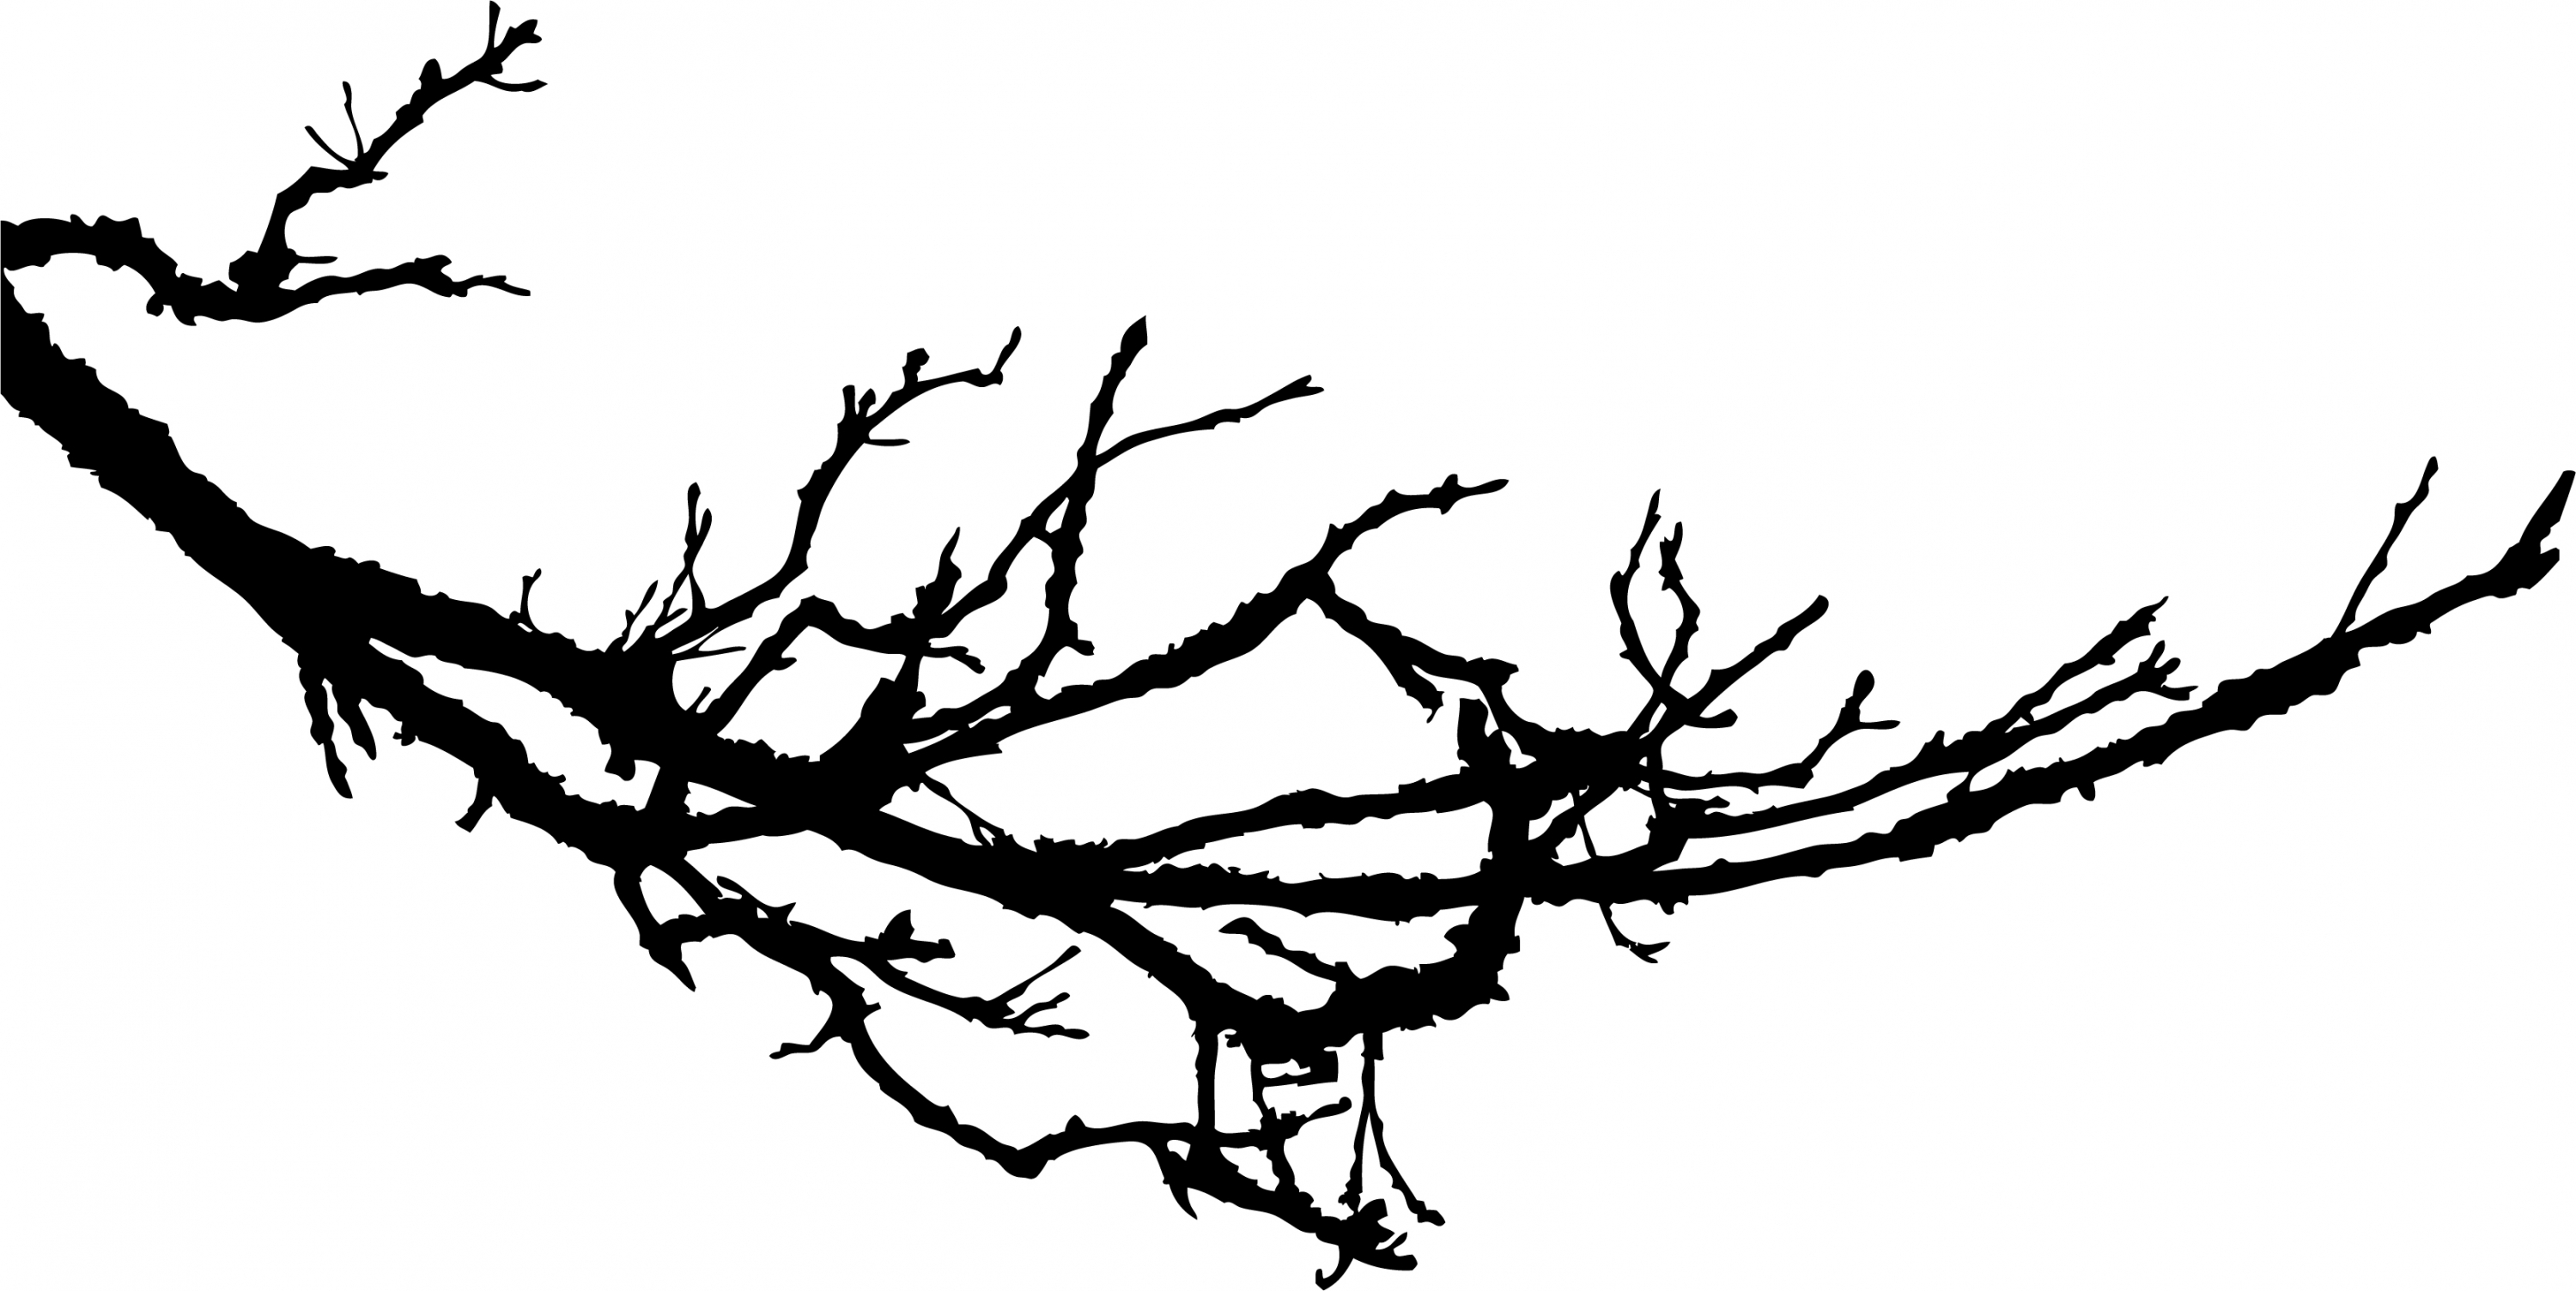 Branches silhouette clipart